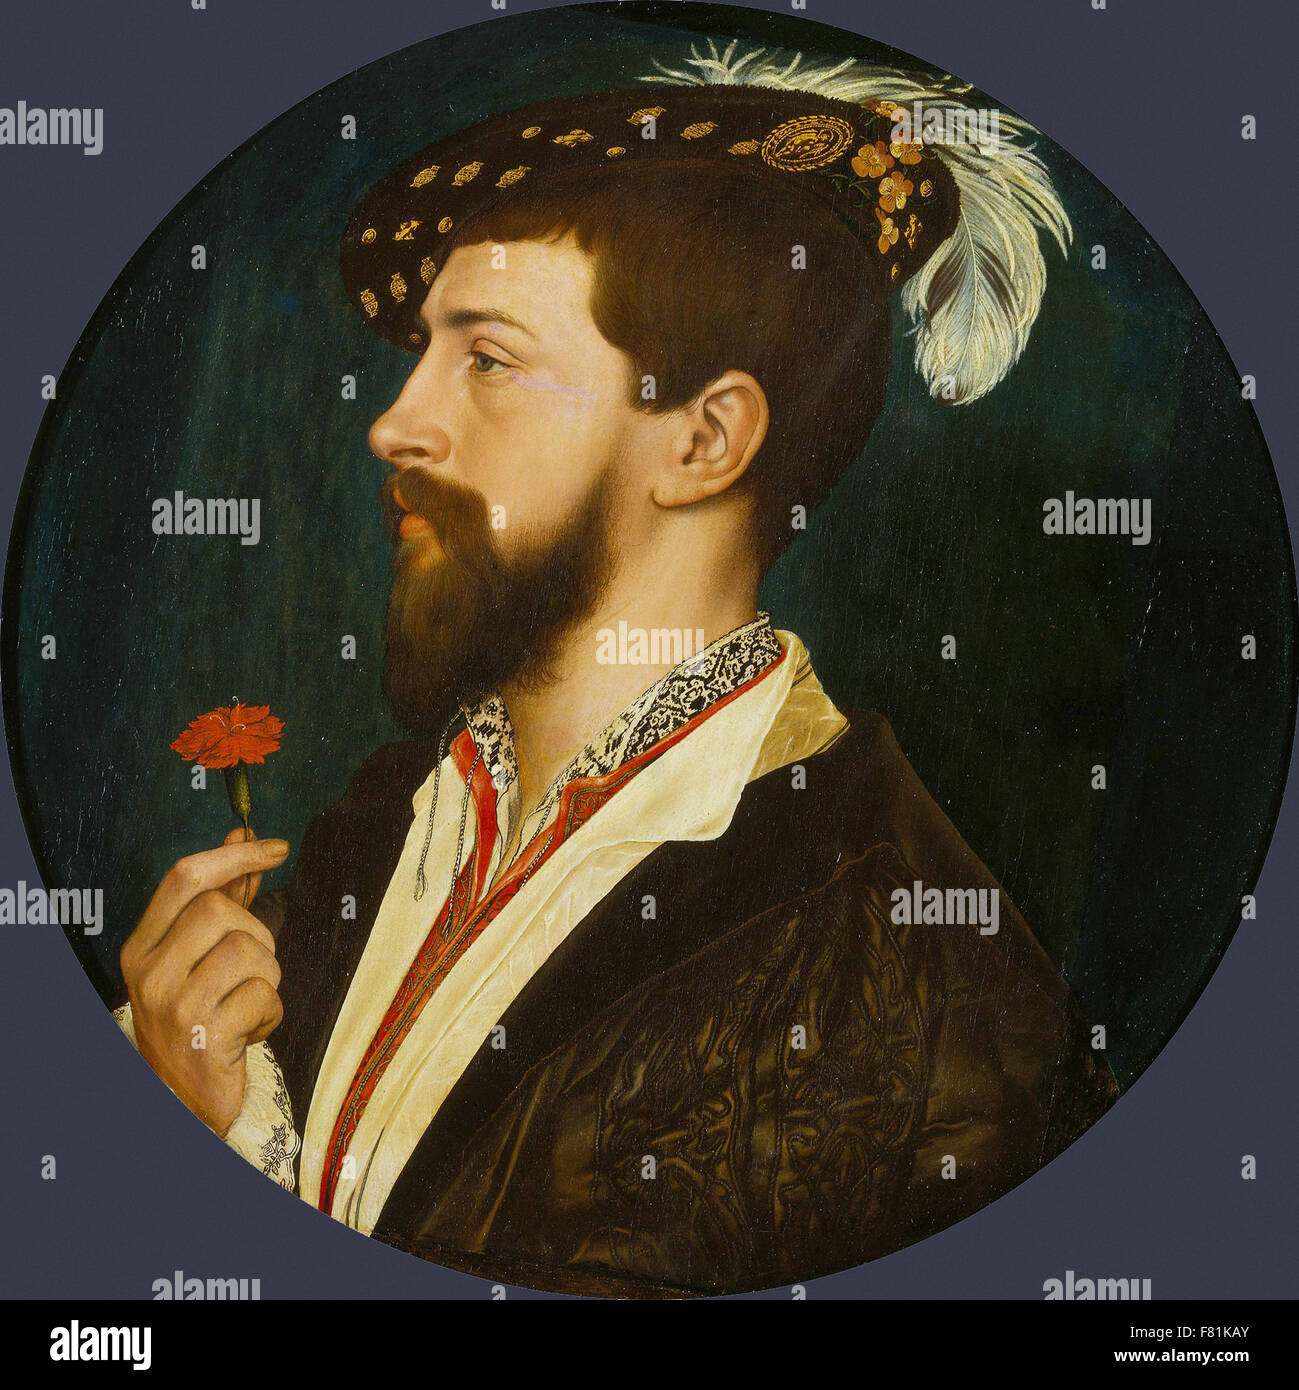 Hans Holbein the Younger - Portrait of Simon George of Cornwall Stock Photo